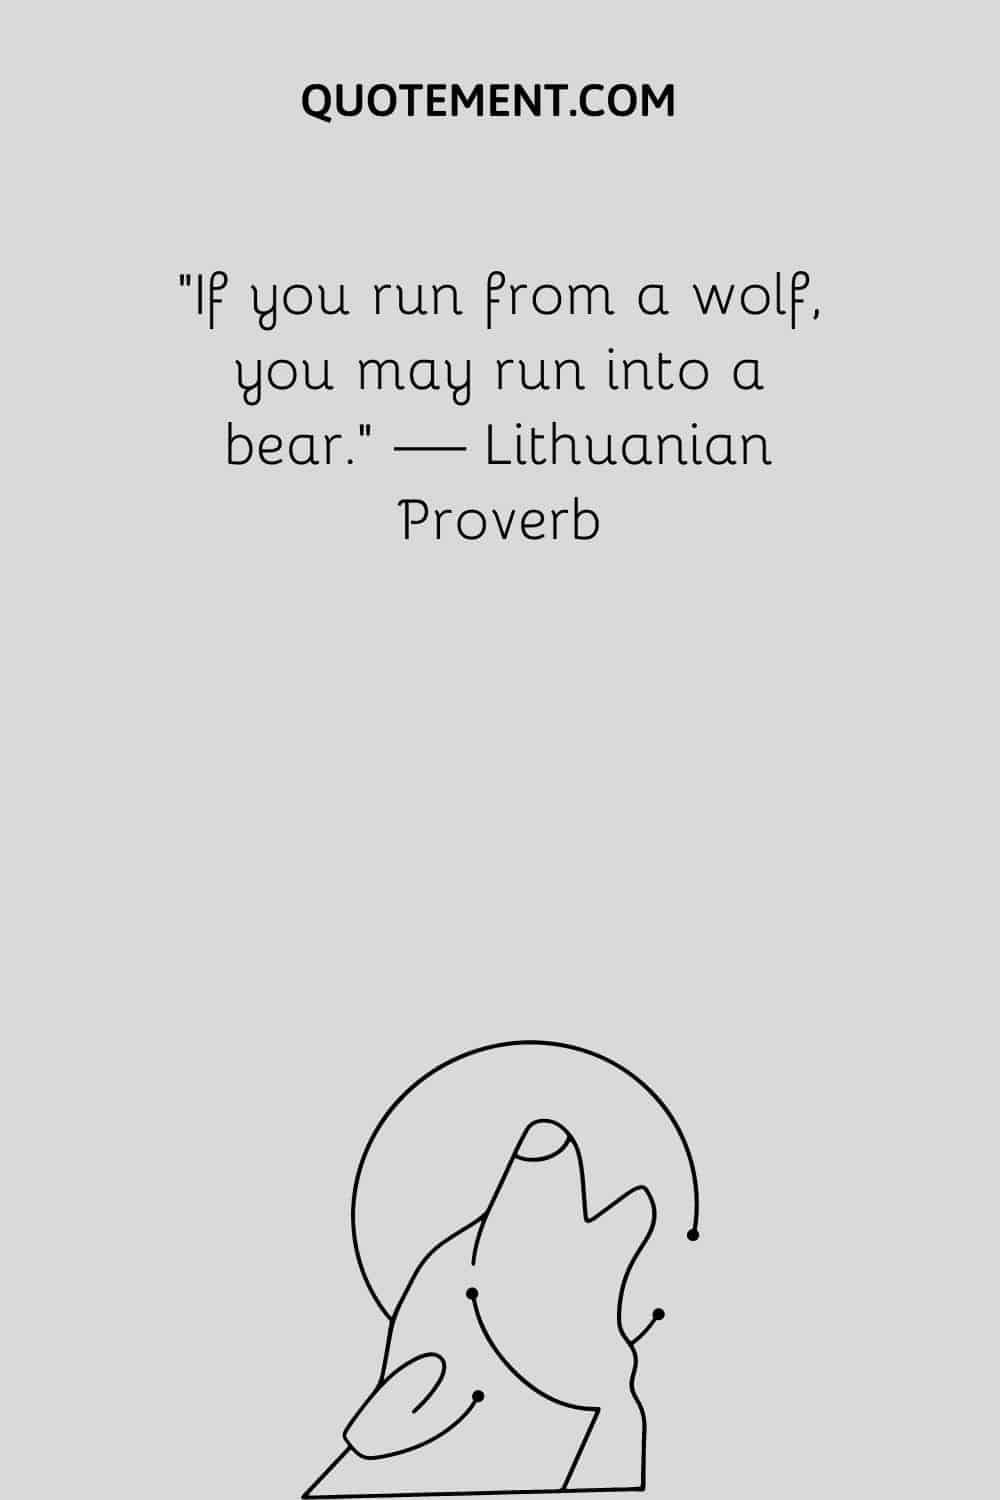 If you run from a wolf, you may run into a bear.